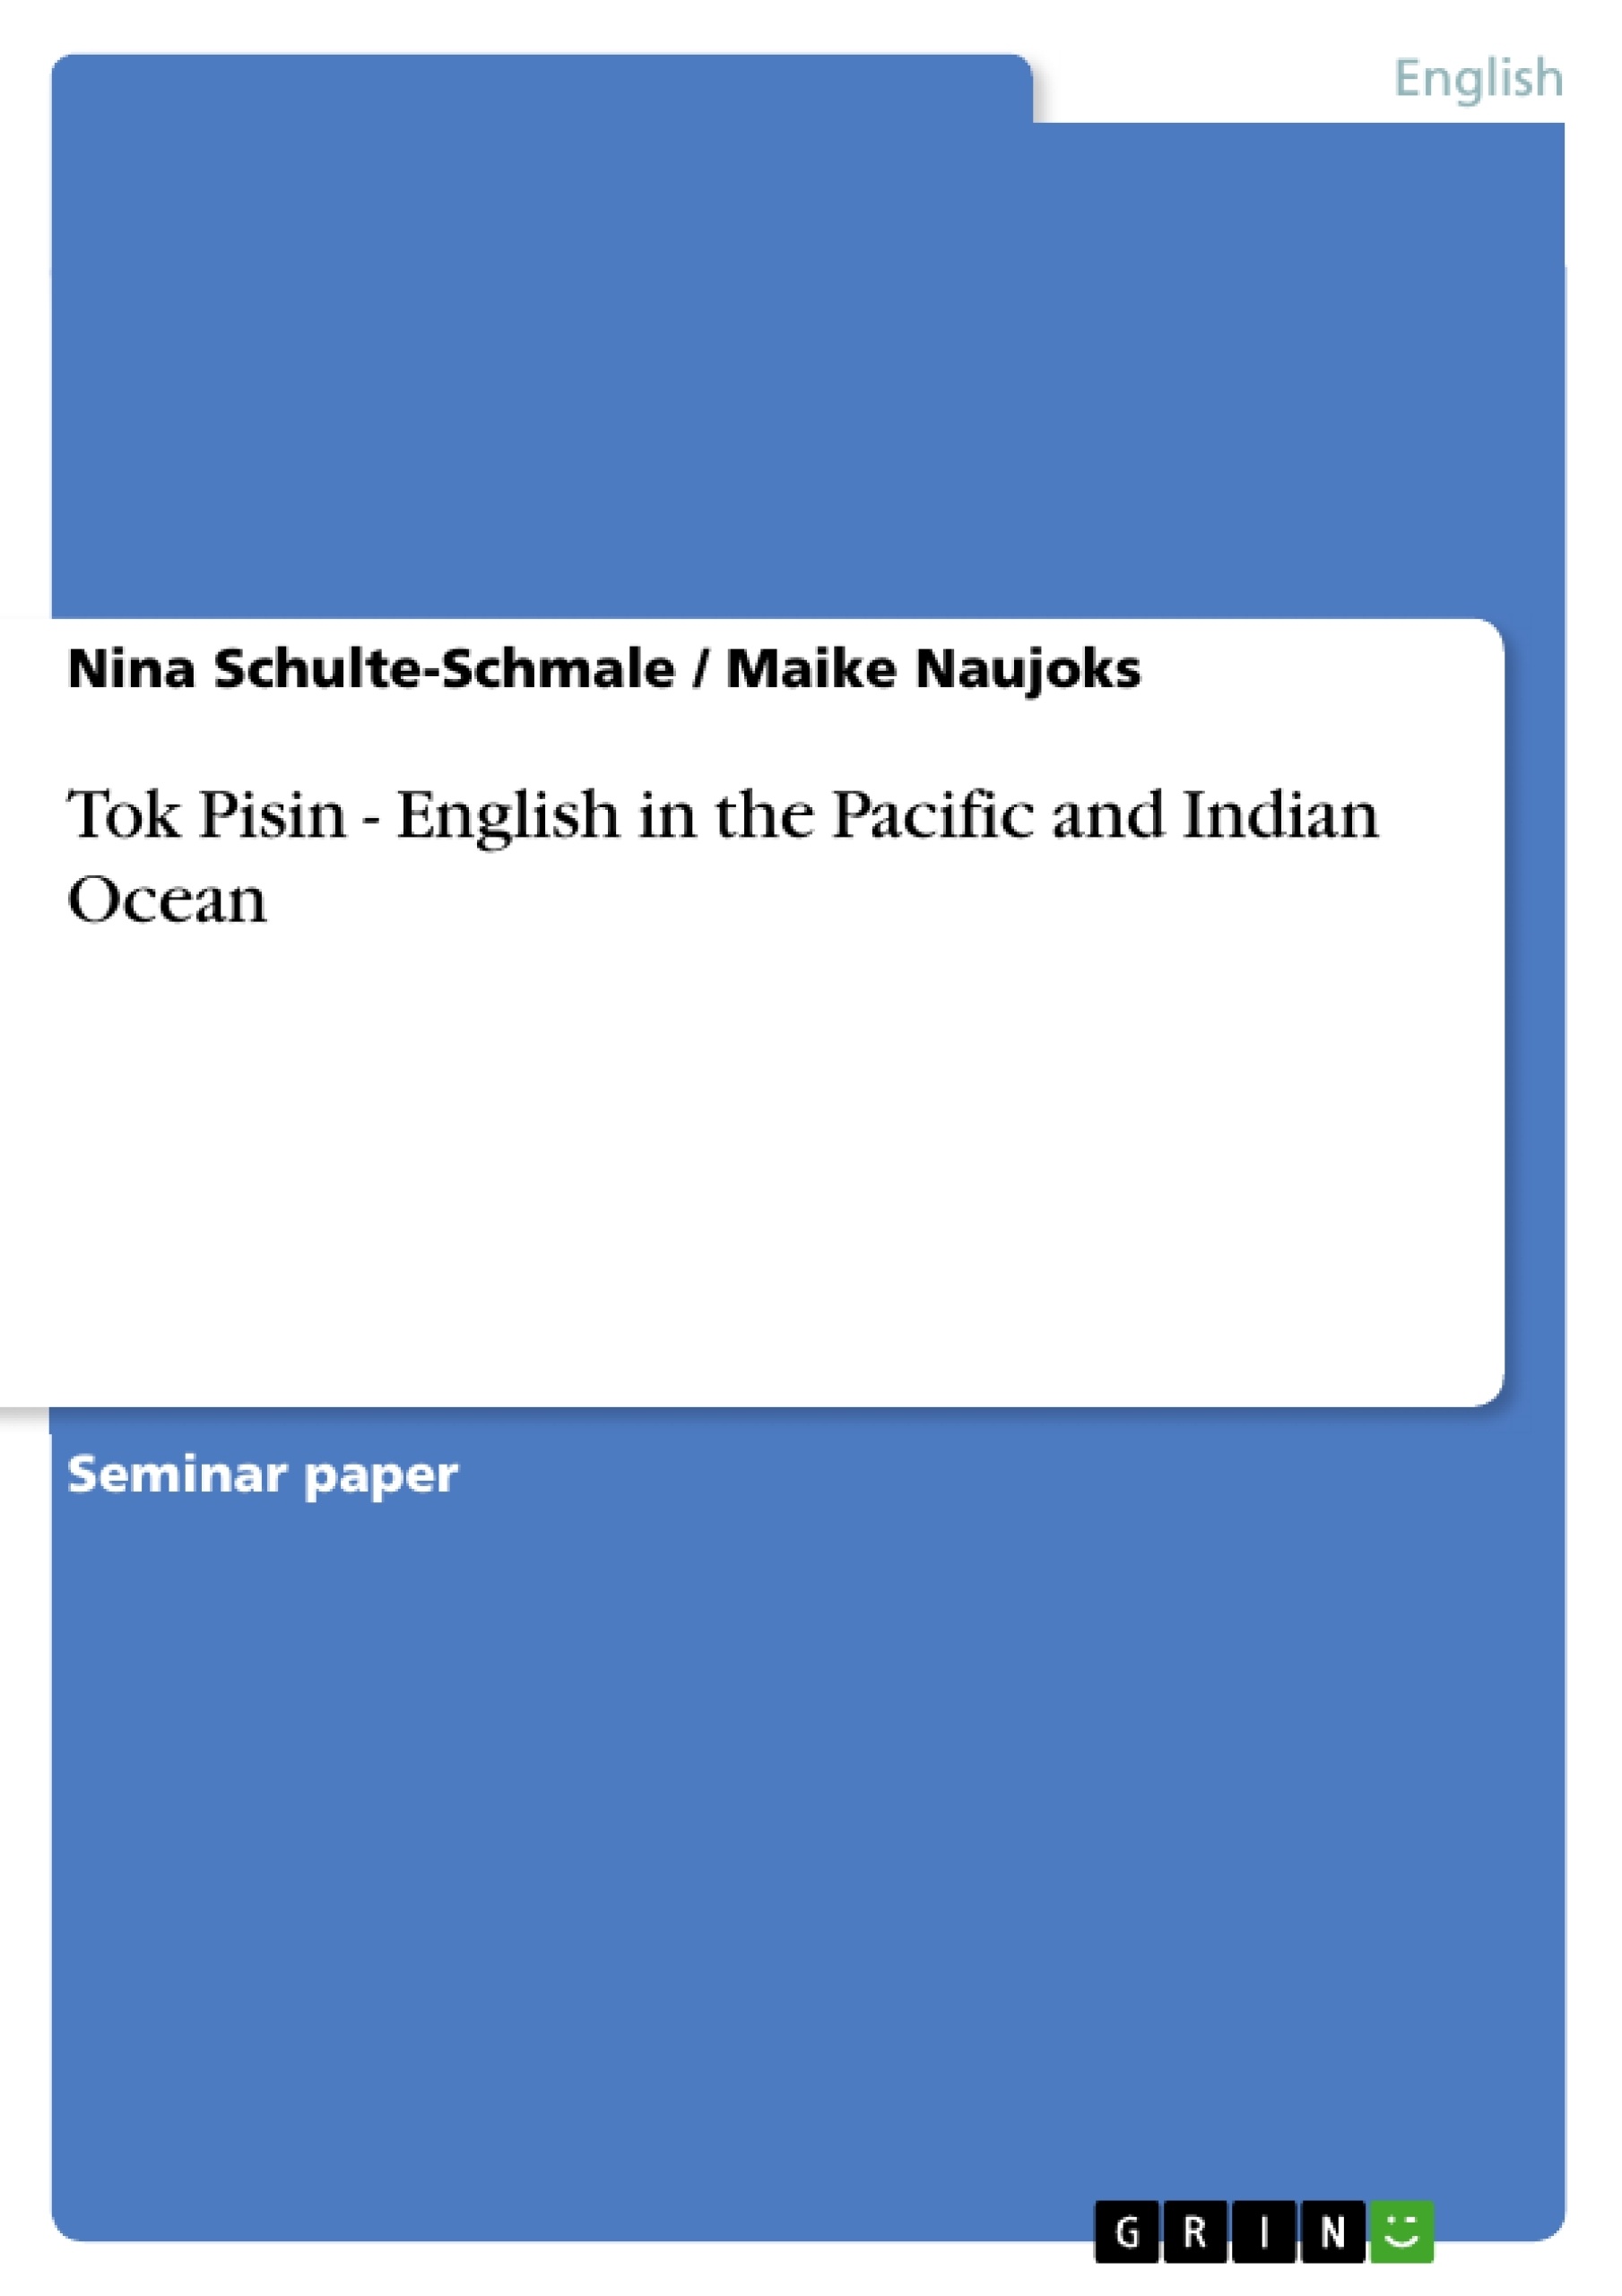 Titre: Tok Pisin - English in the Pacific and Indian Ocean